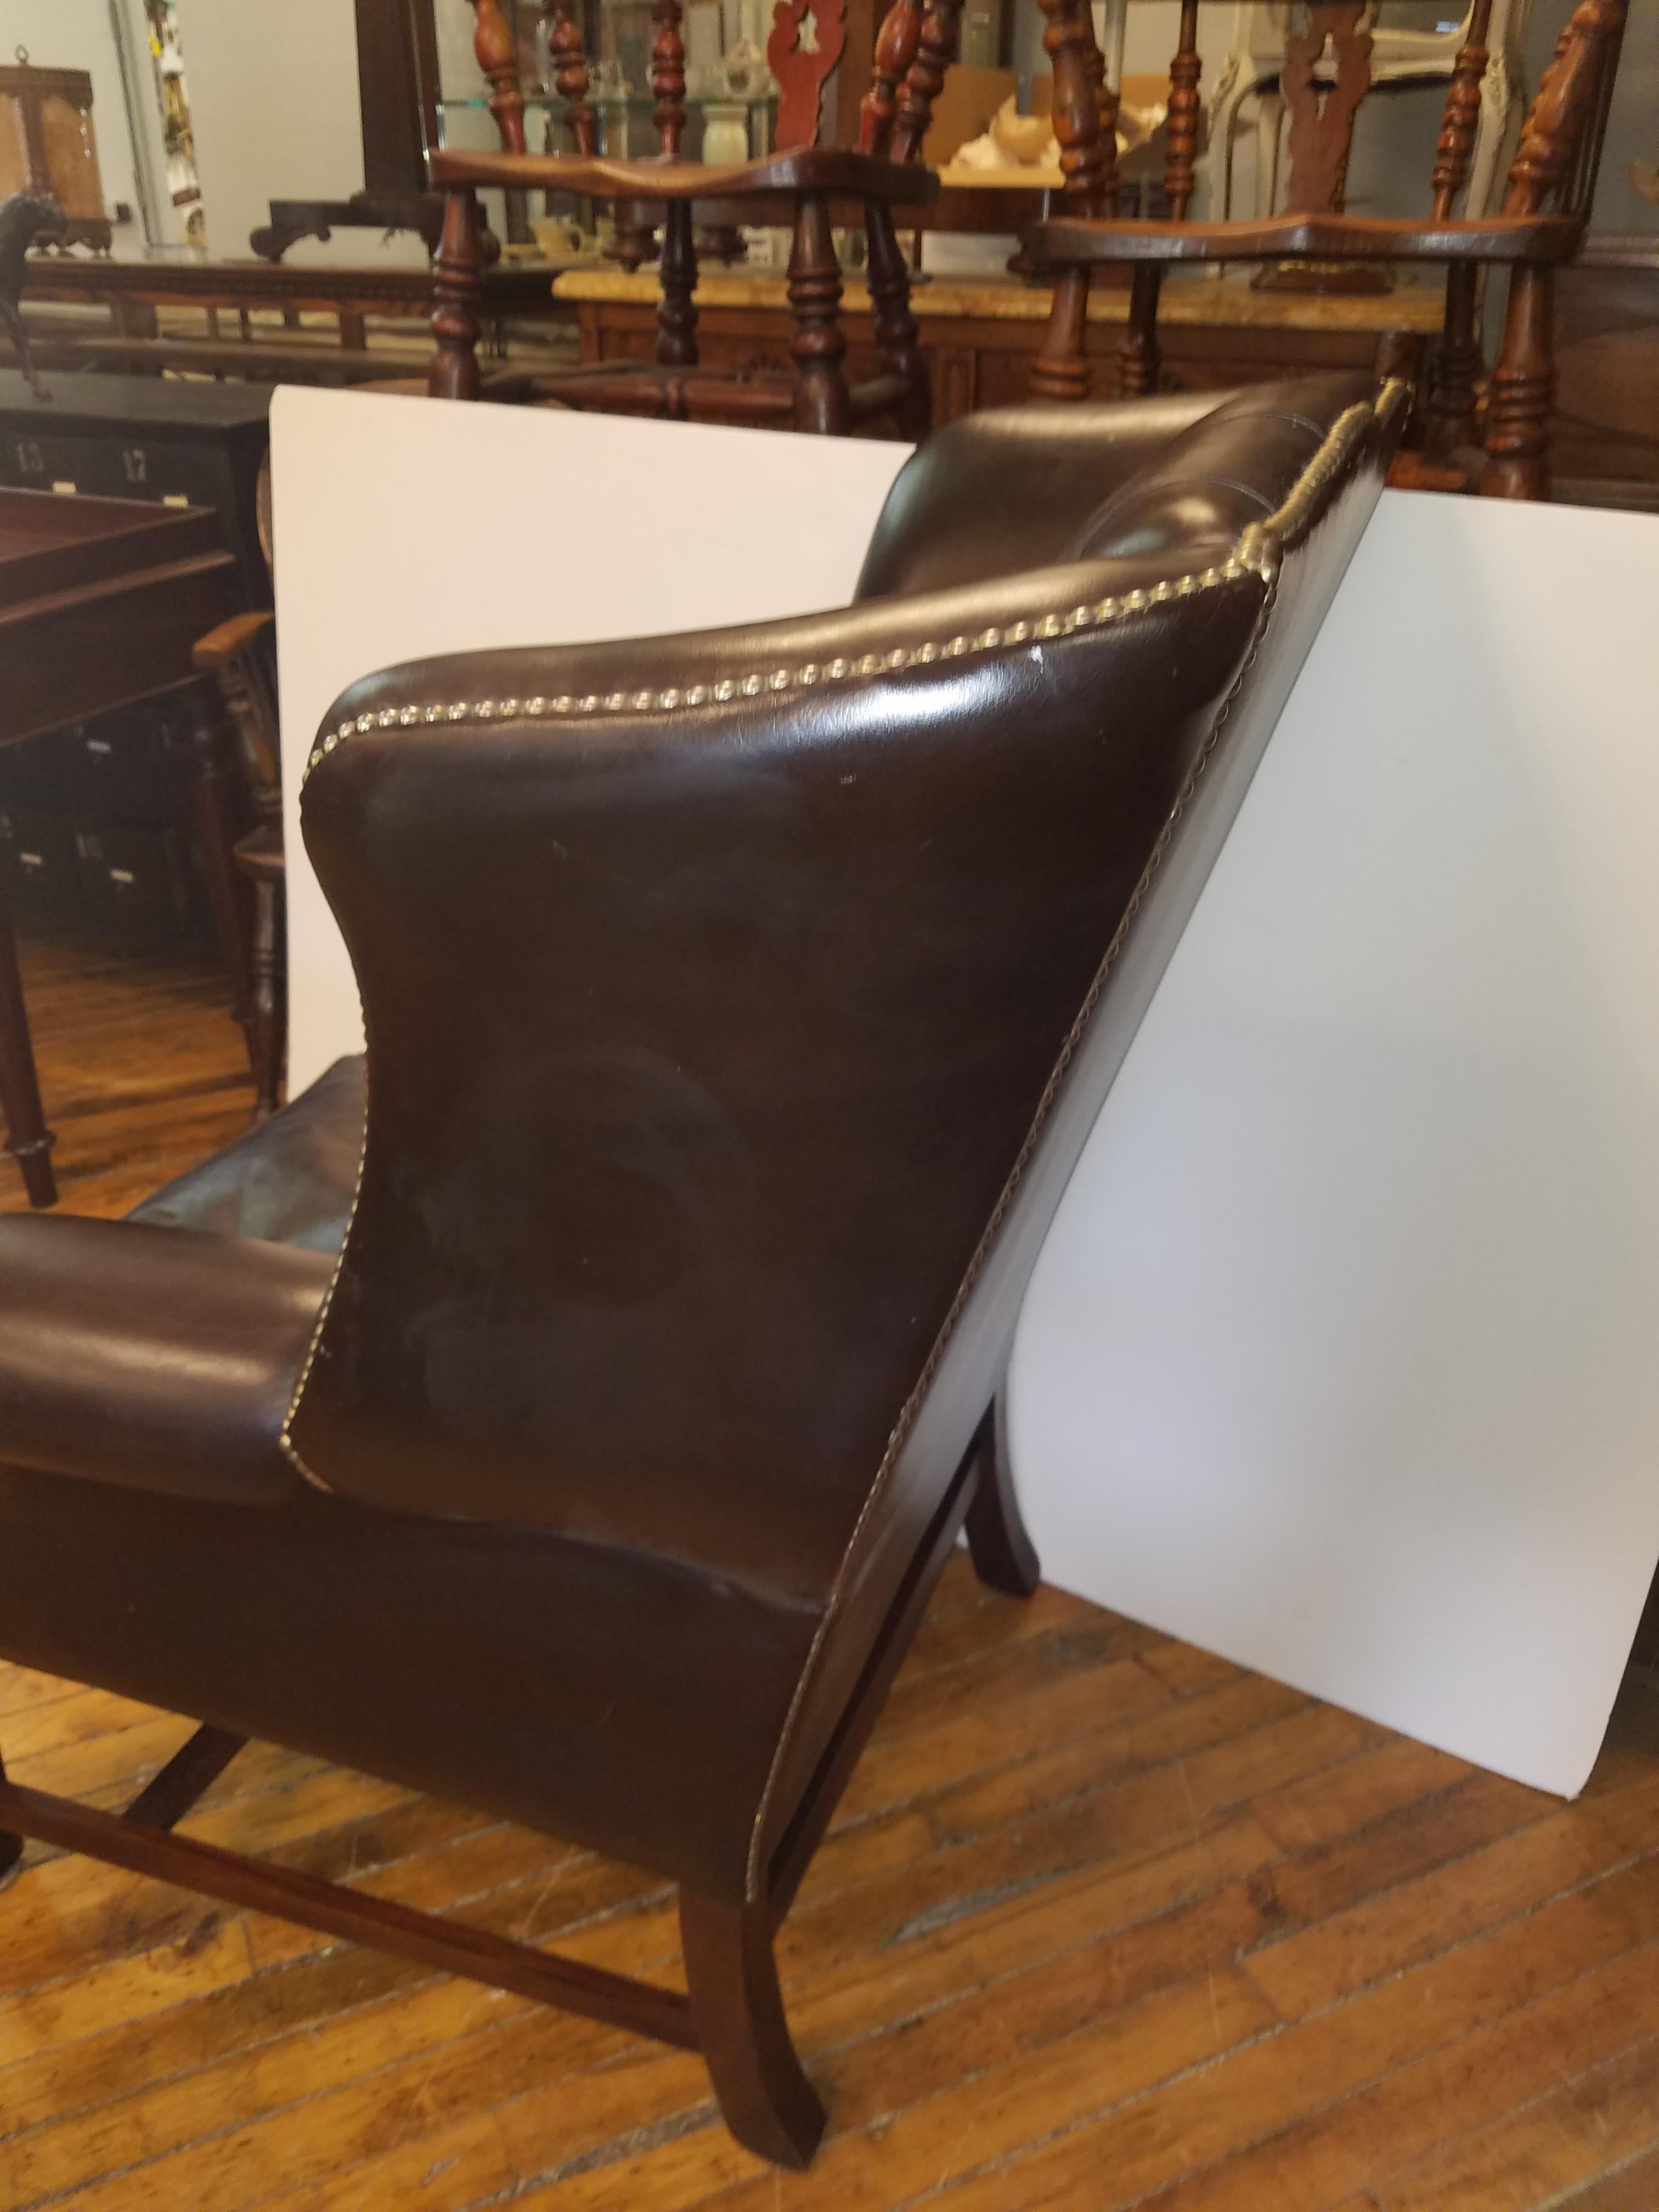 1950s English wingback chair in a dark brandy color leather with brass nailhead trim. The chair with shapely sides and deep tufted attached back and mahogany legs.

  